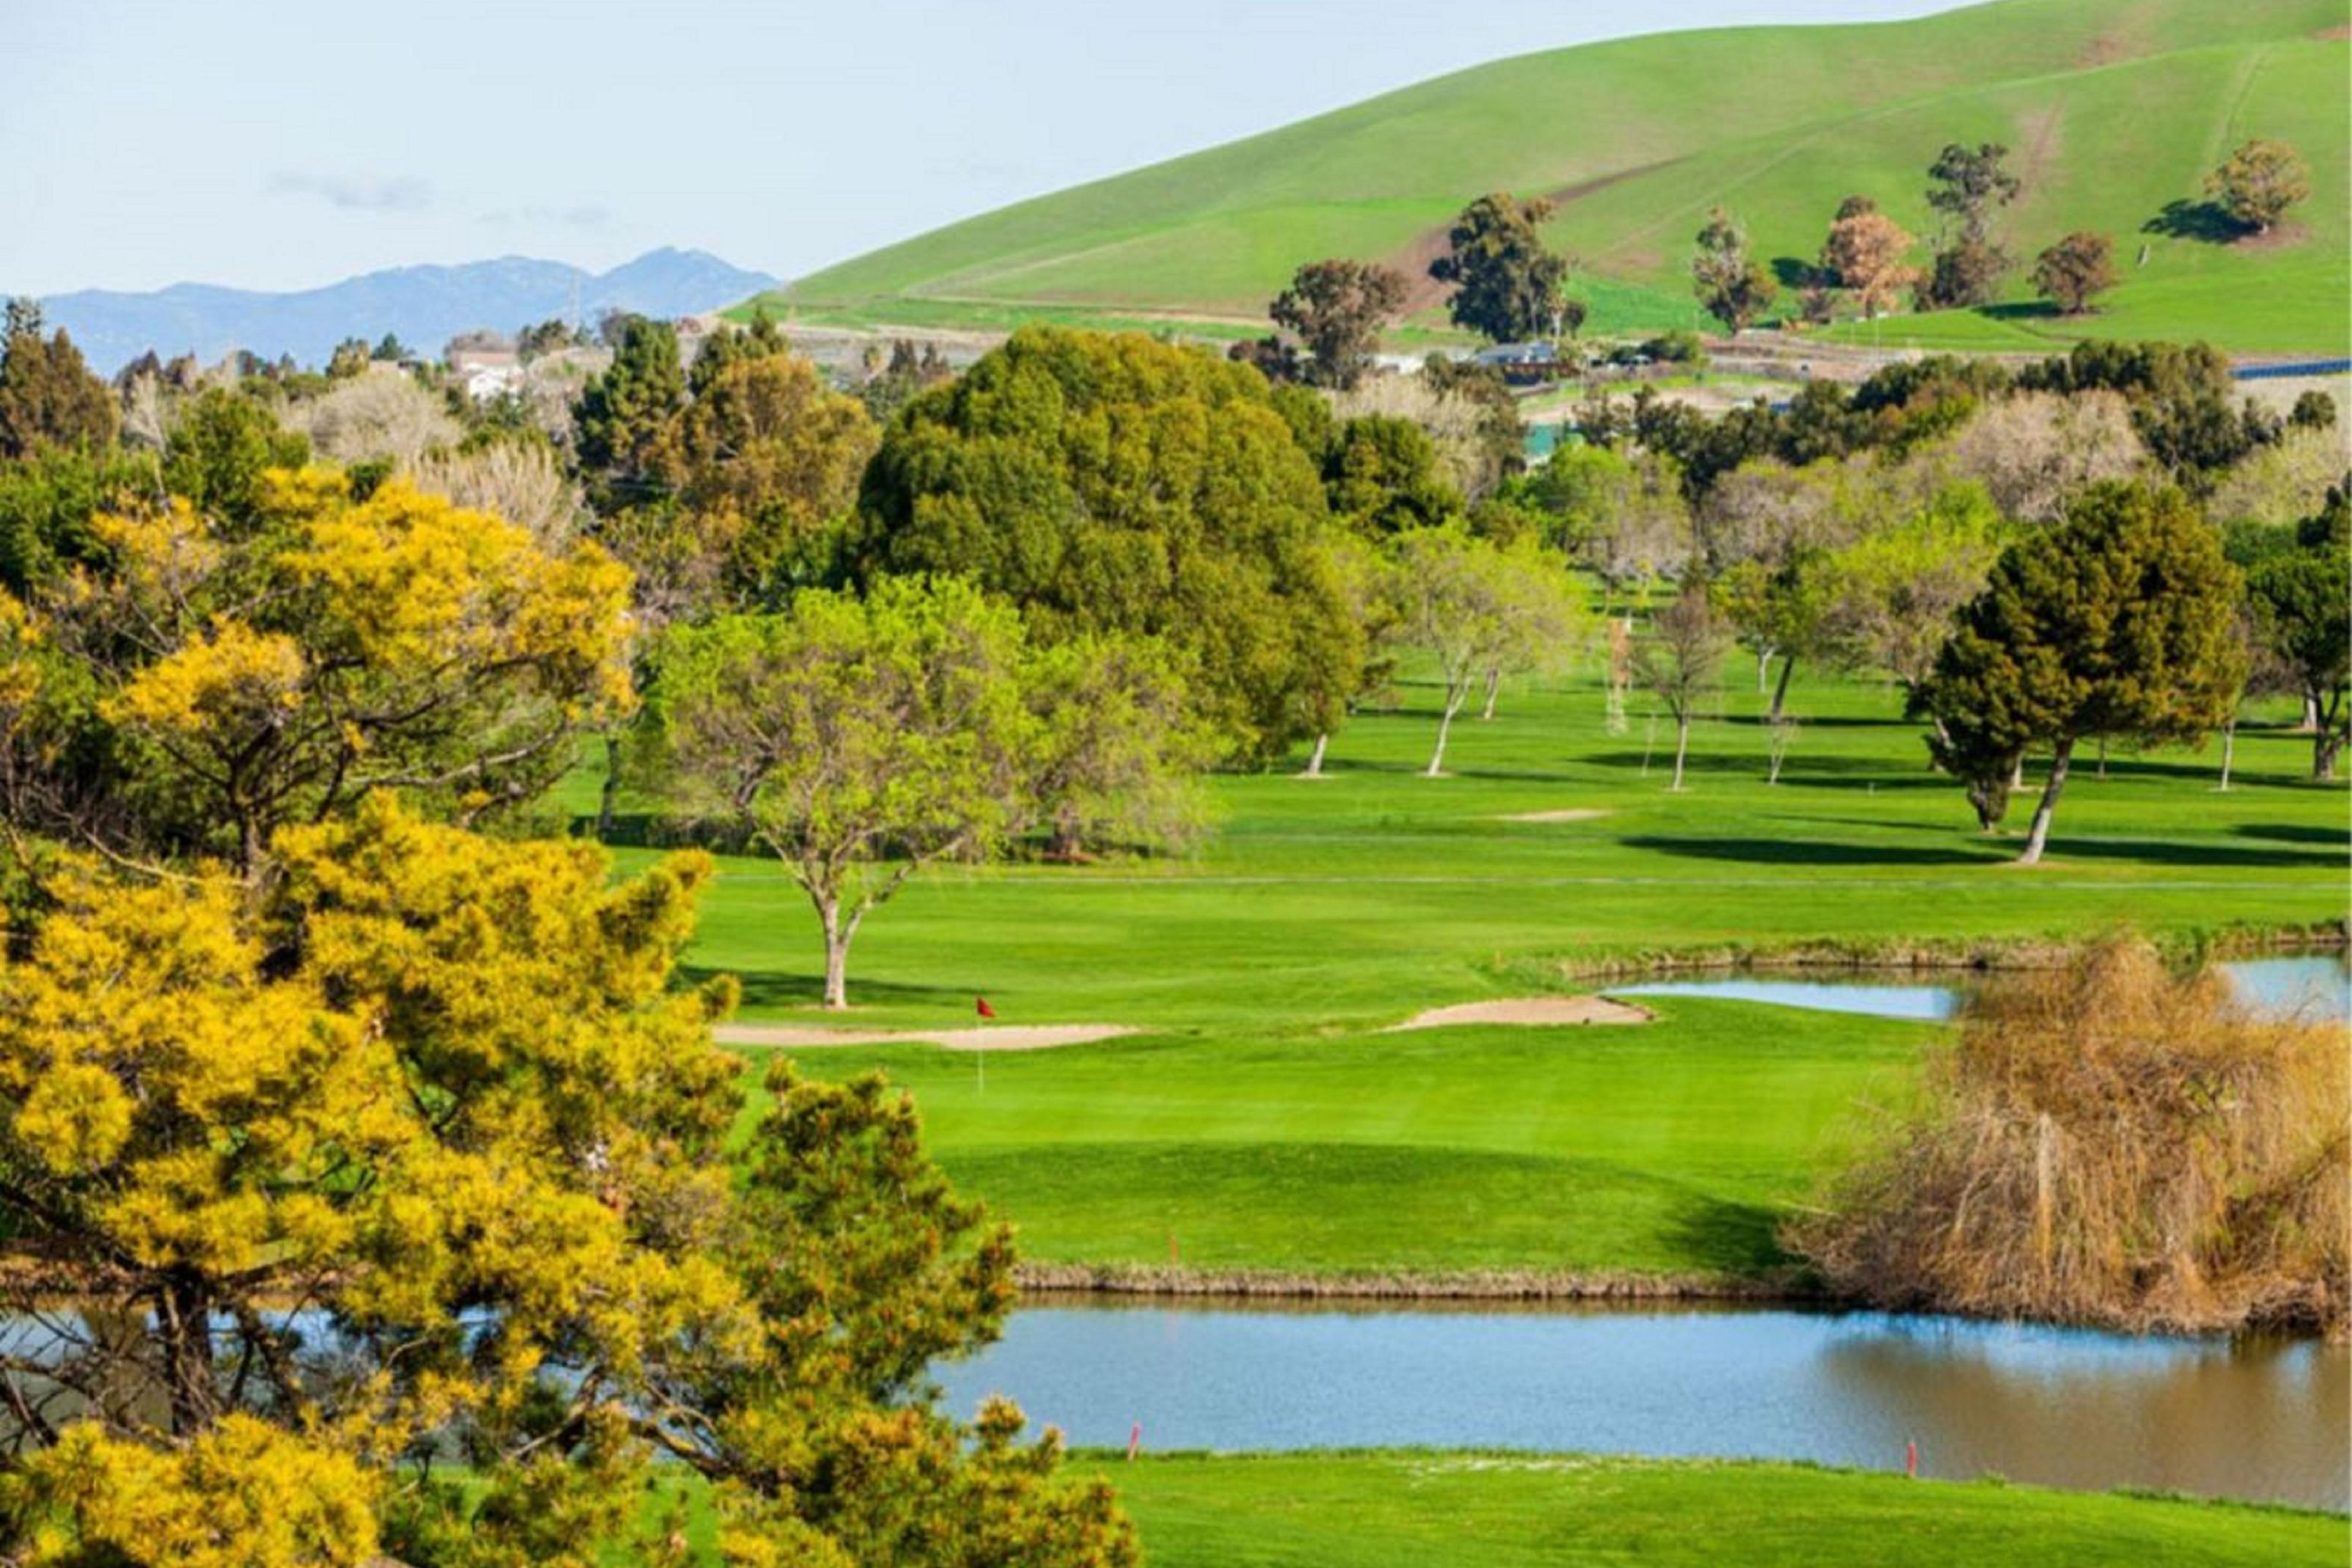 Visit a beautiful local golf course on your next business trip.